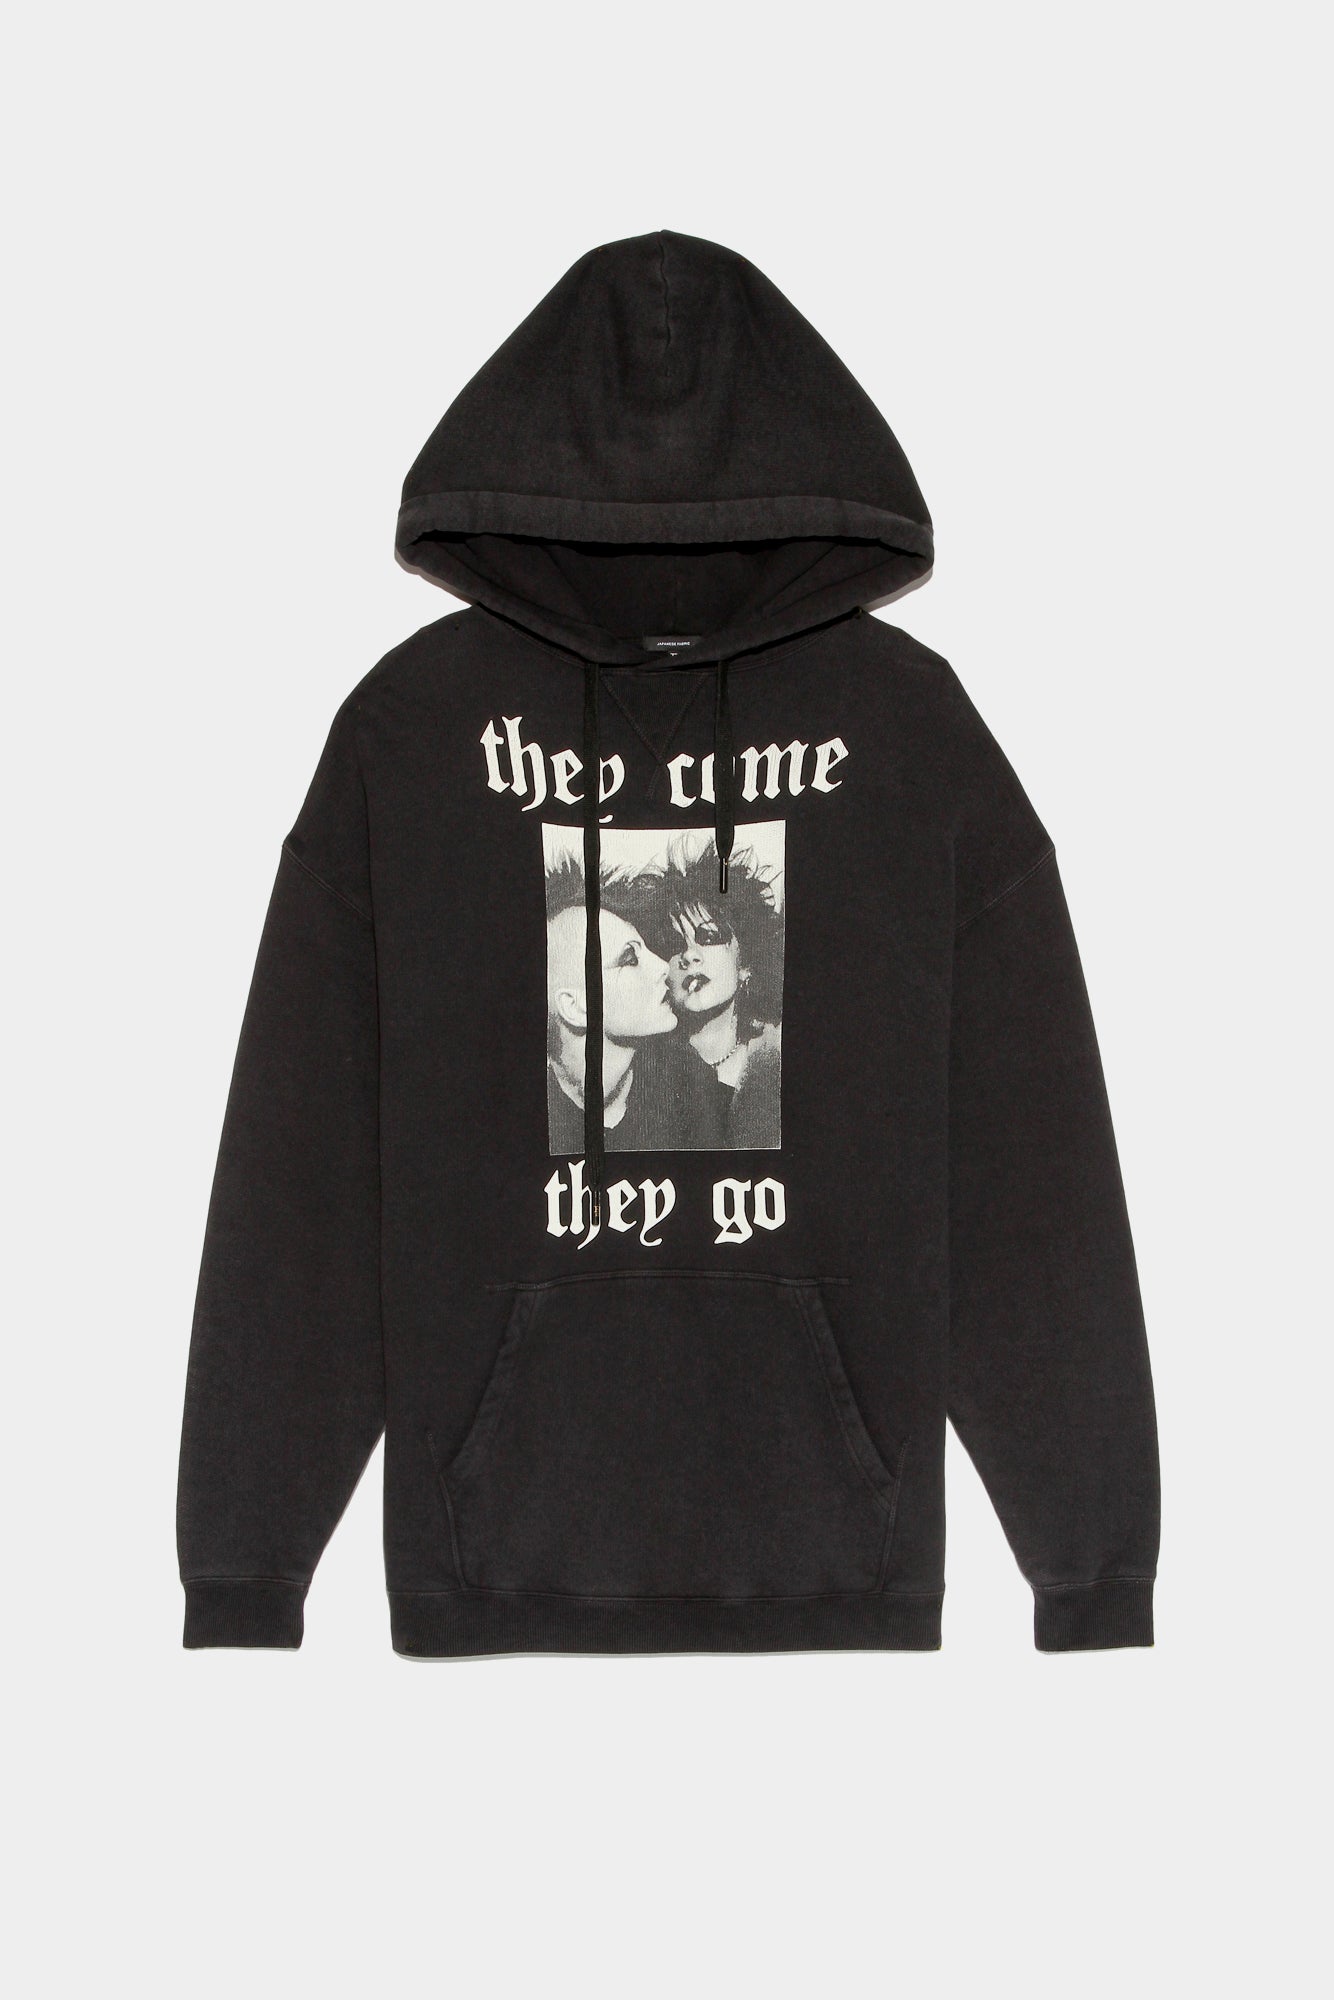 THEY COME THEY GO HOODIE